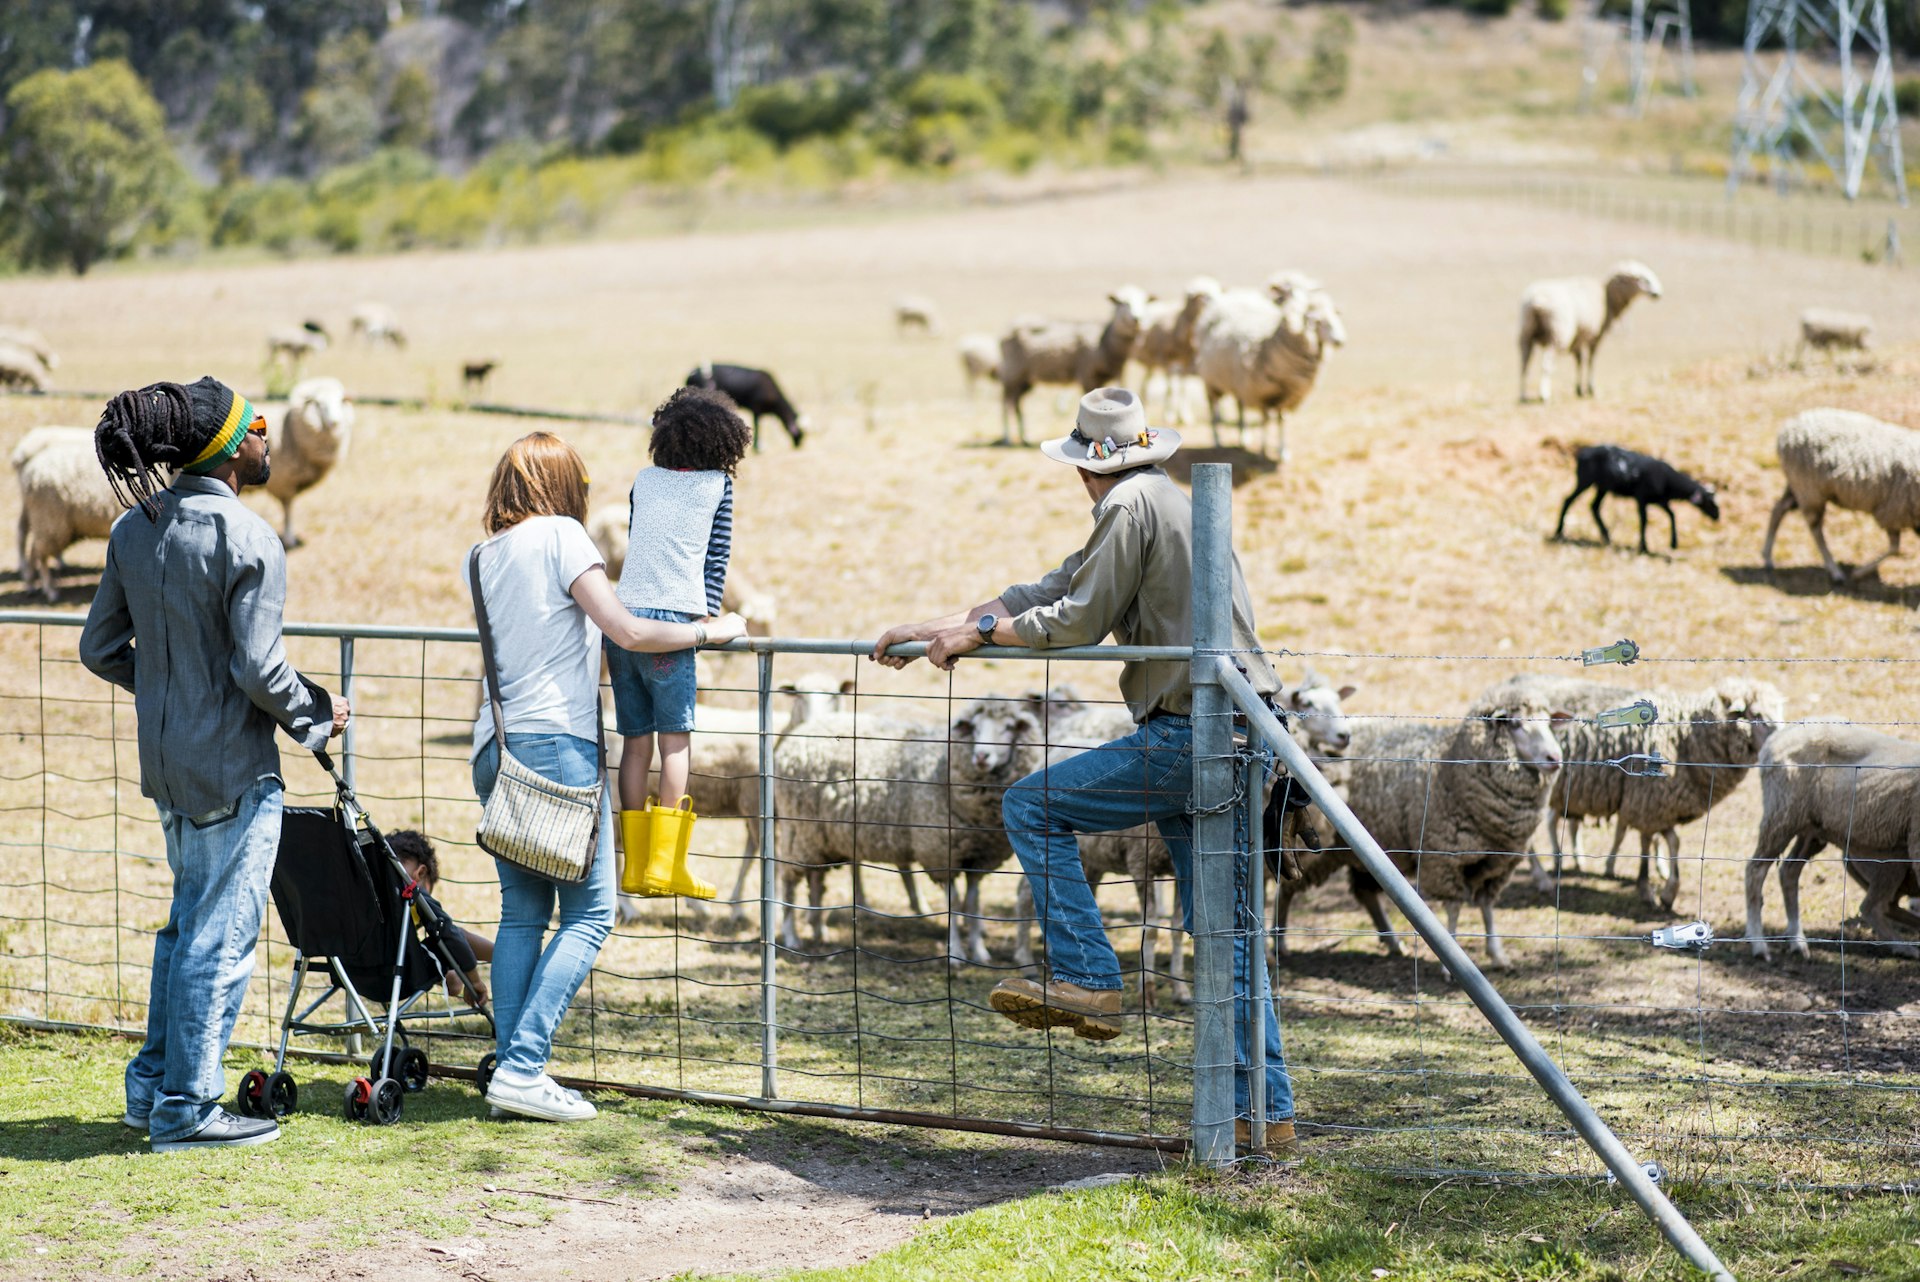 Family and a farm worker explore a farm with many sheep in a field